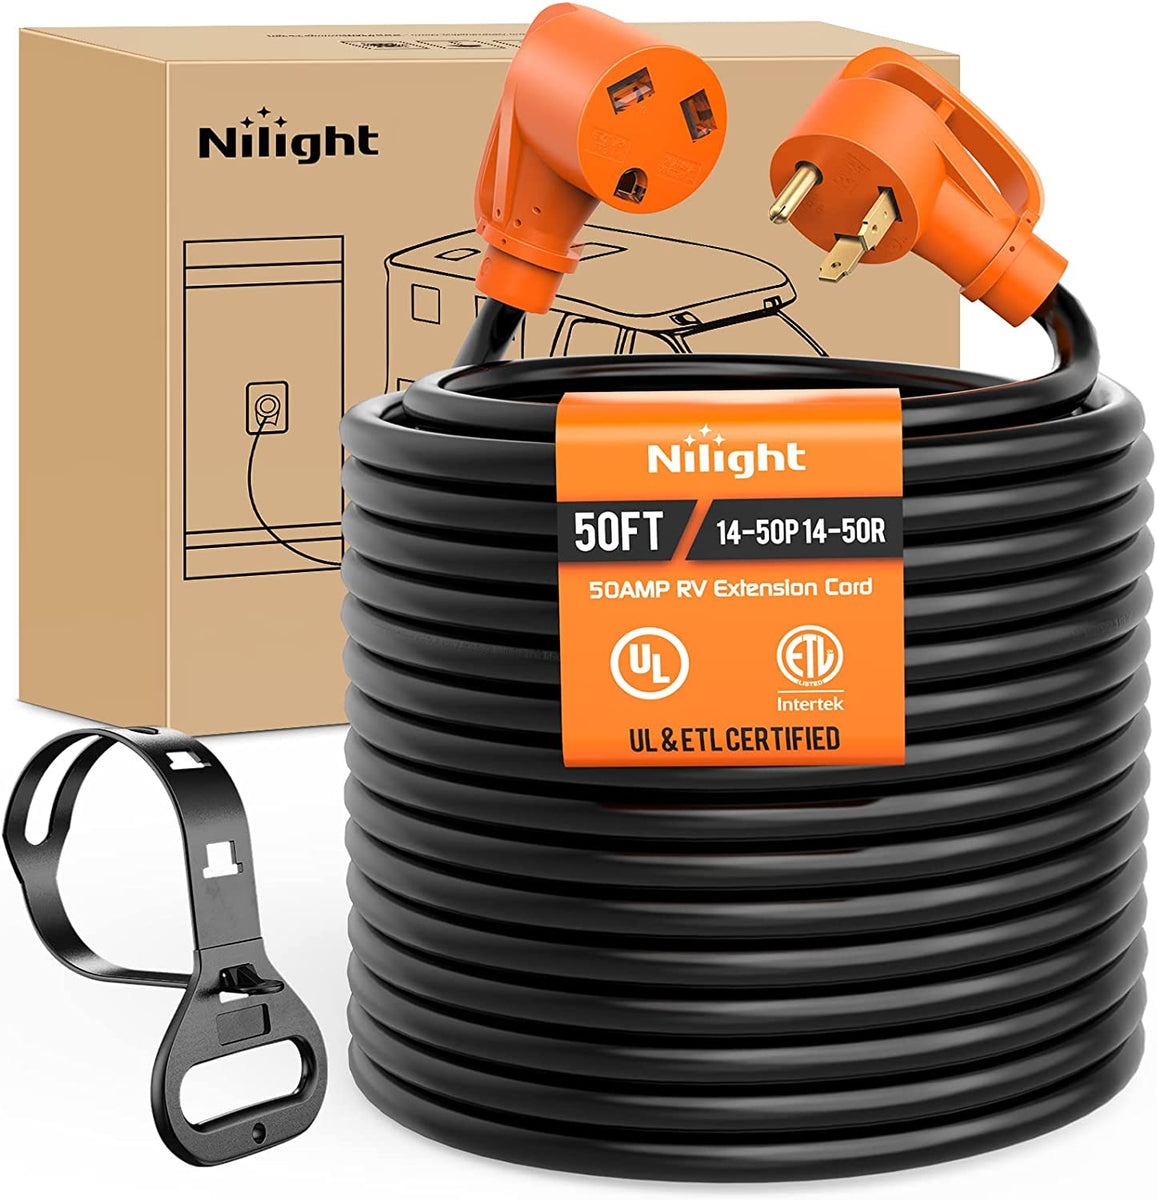 30Amp 50FT RV Extension Cord – Nilight